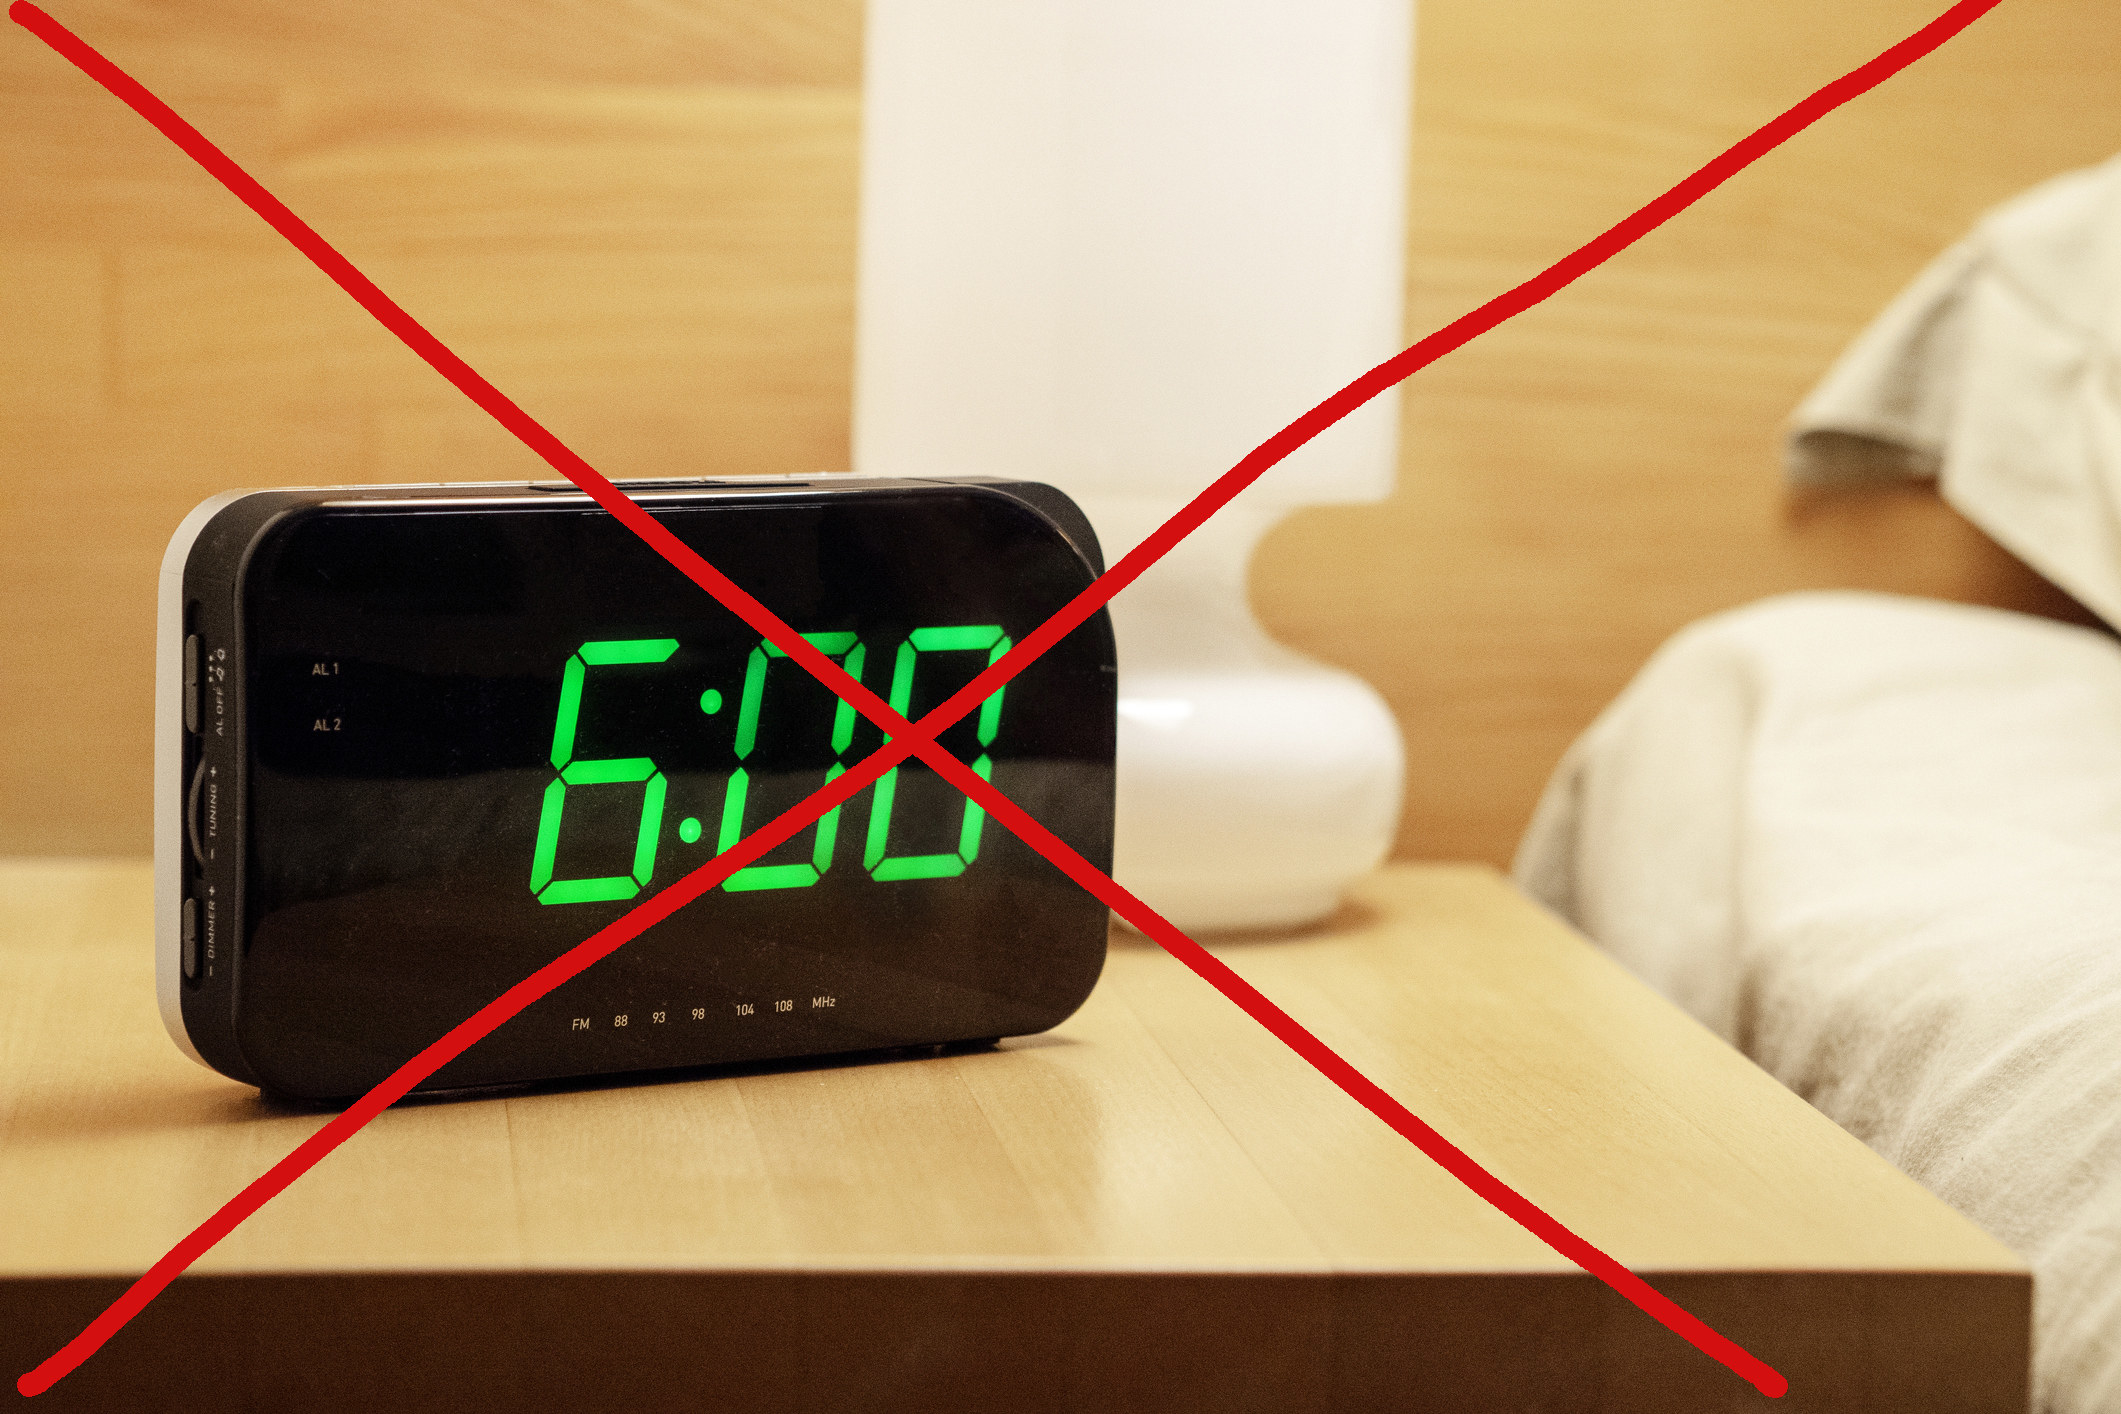 An alarm clock set to 6:00 a.m. but the entire image is crossed out